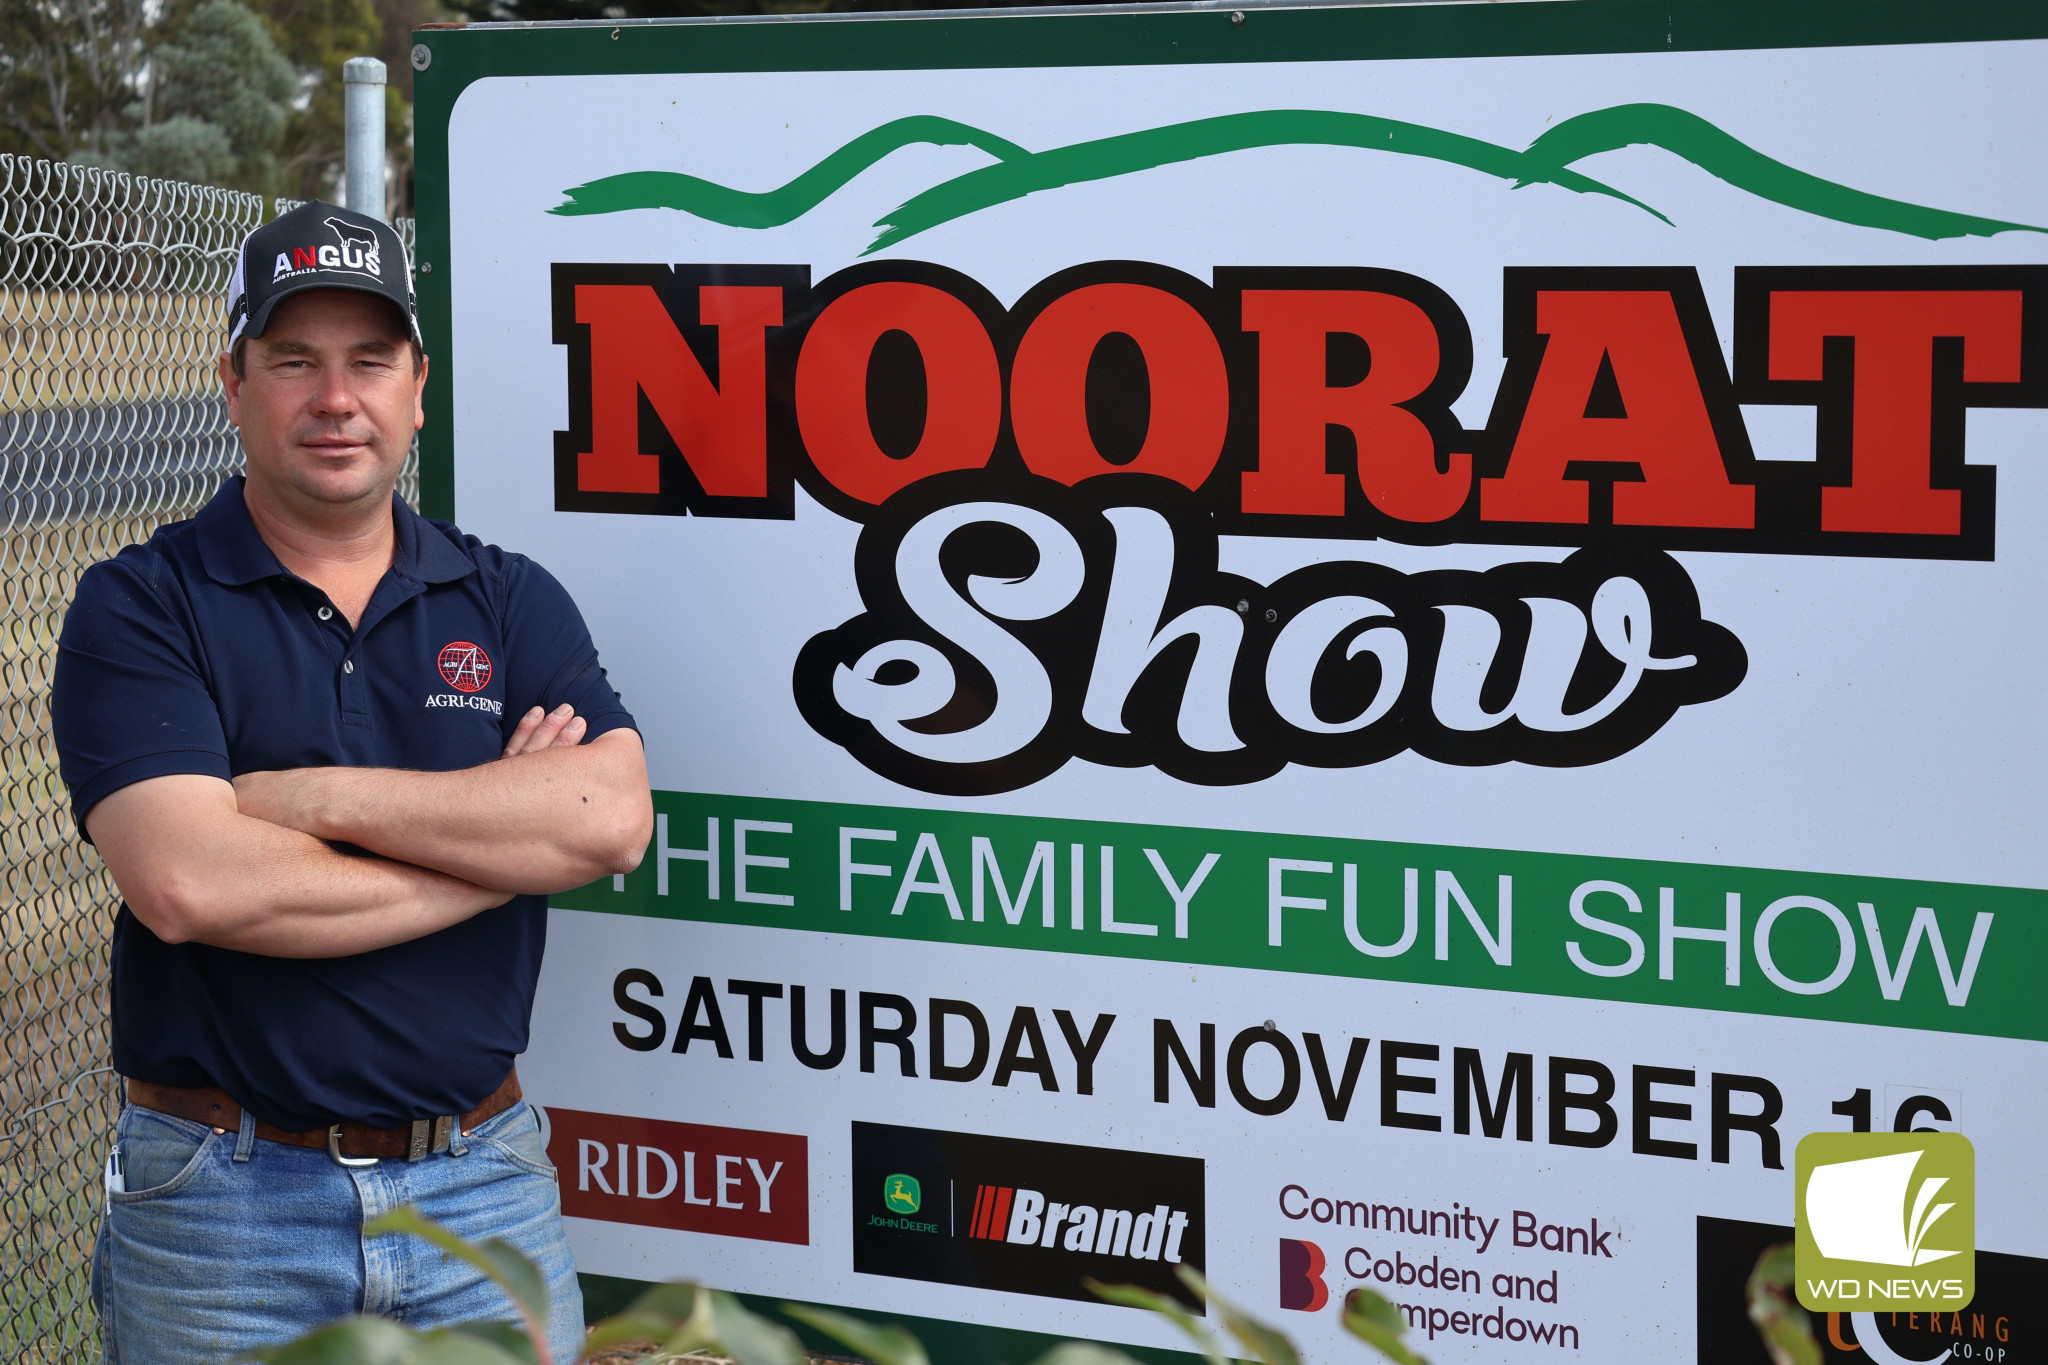 At the helm: Noorat’s Rob Onley has been elected as the newest president of the Noorat Show.